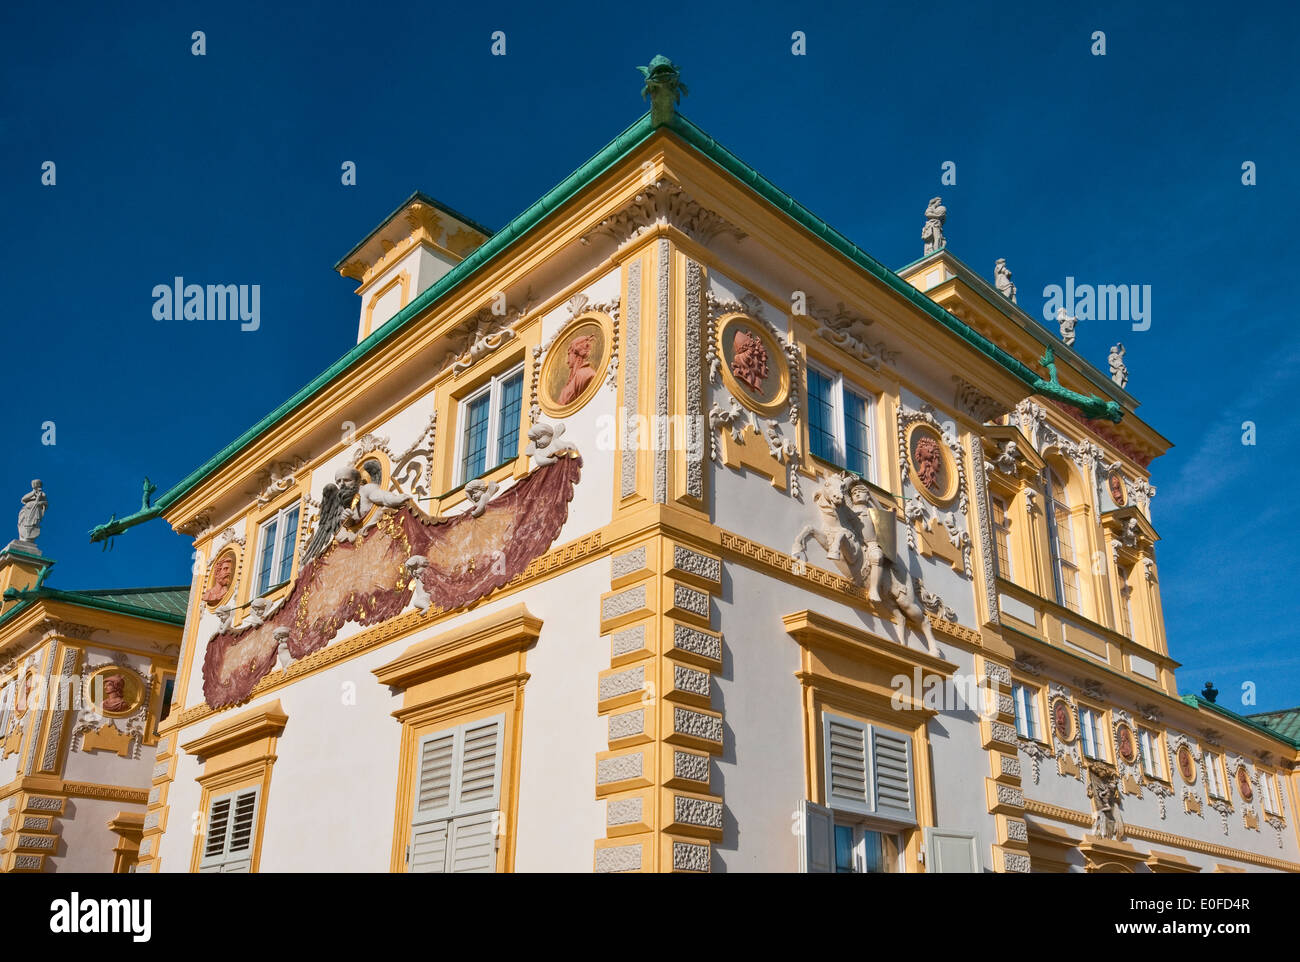 Sundial with Chronos and Pogon on south wall of Wilanów Palace in Warsaw, Poland Stock Photo